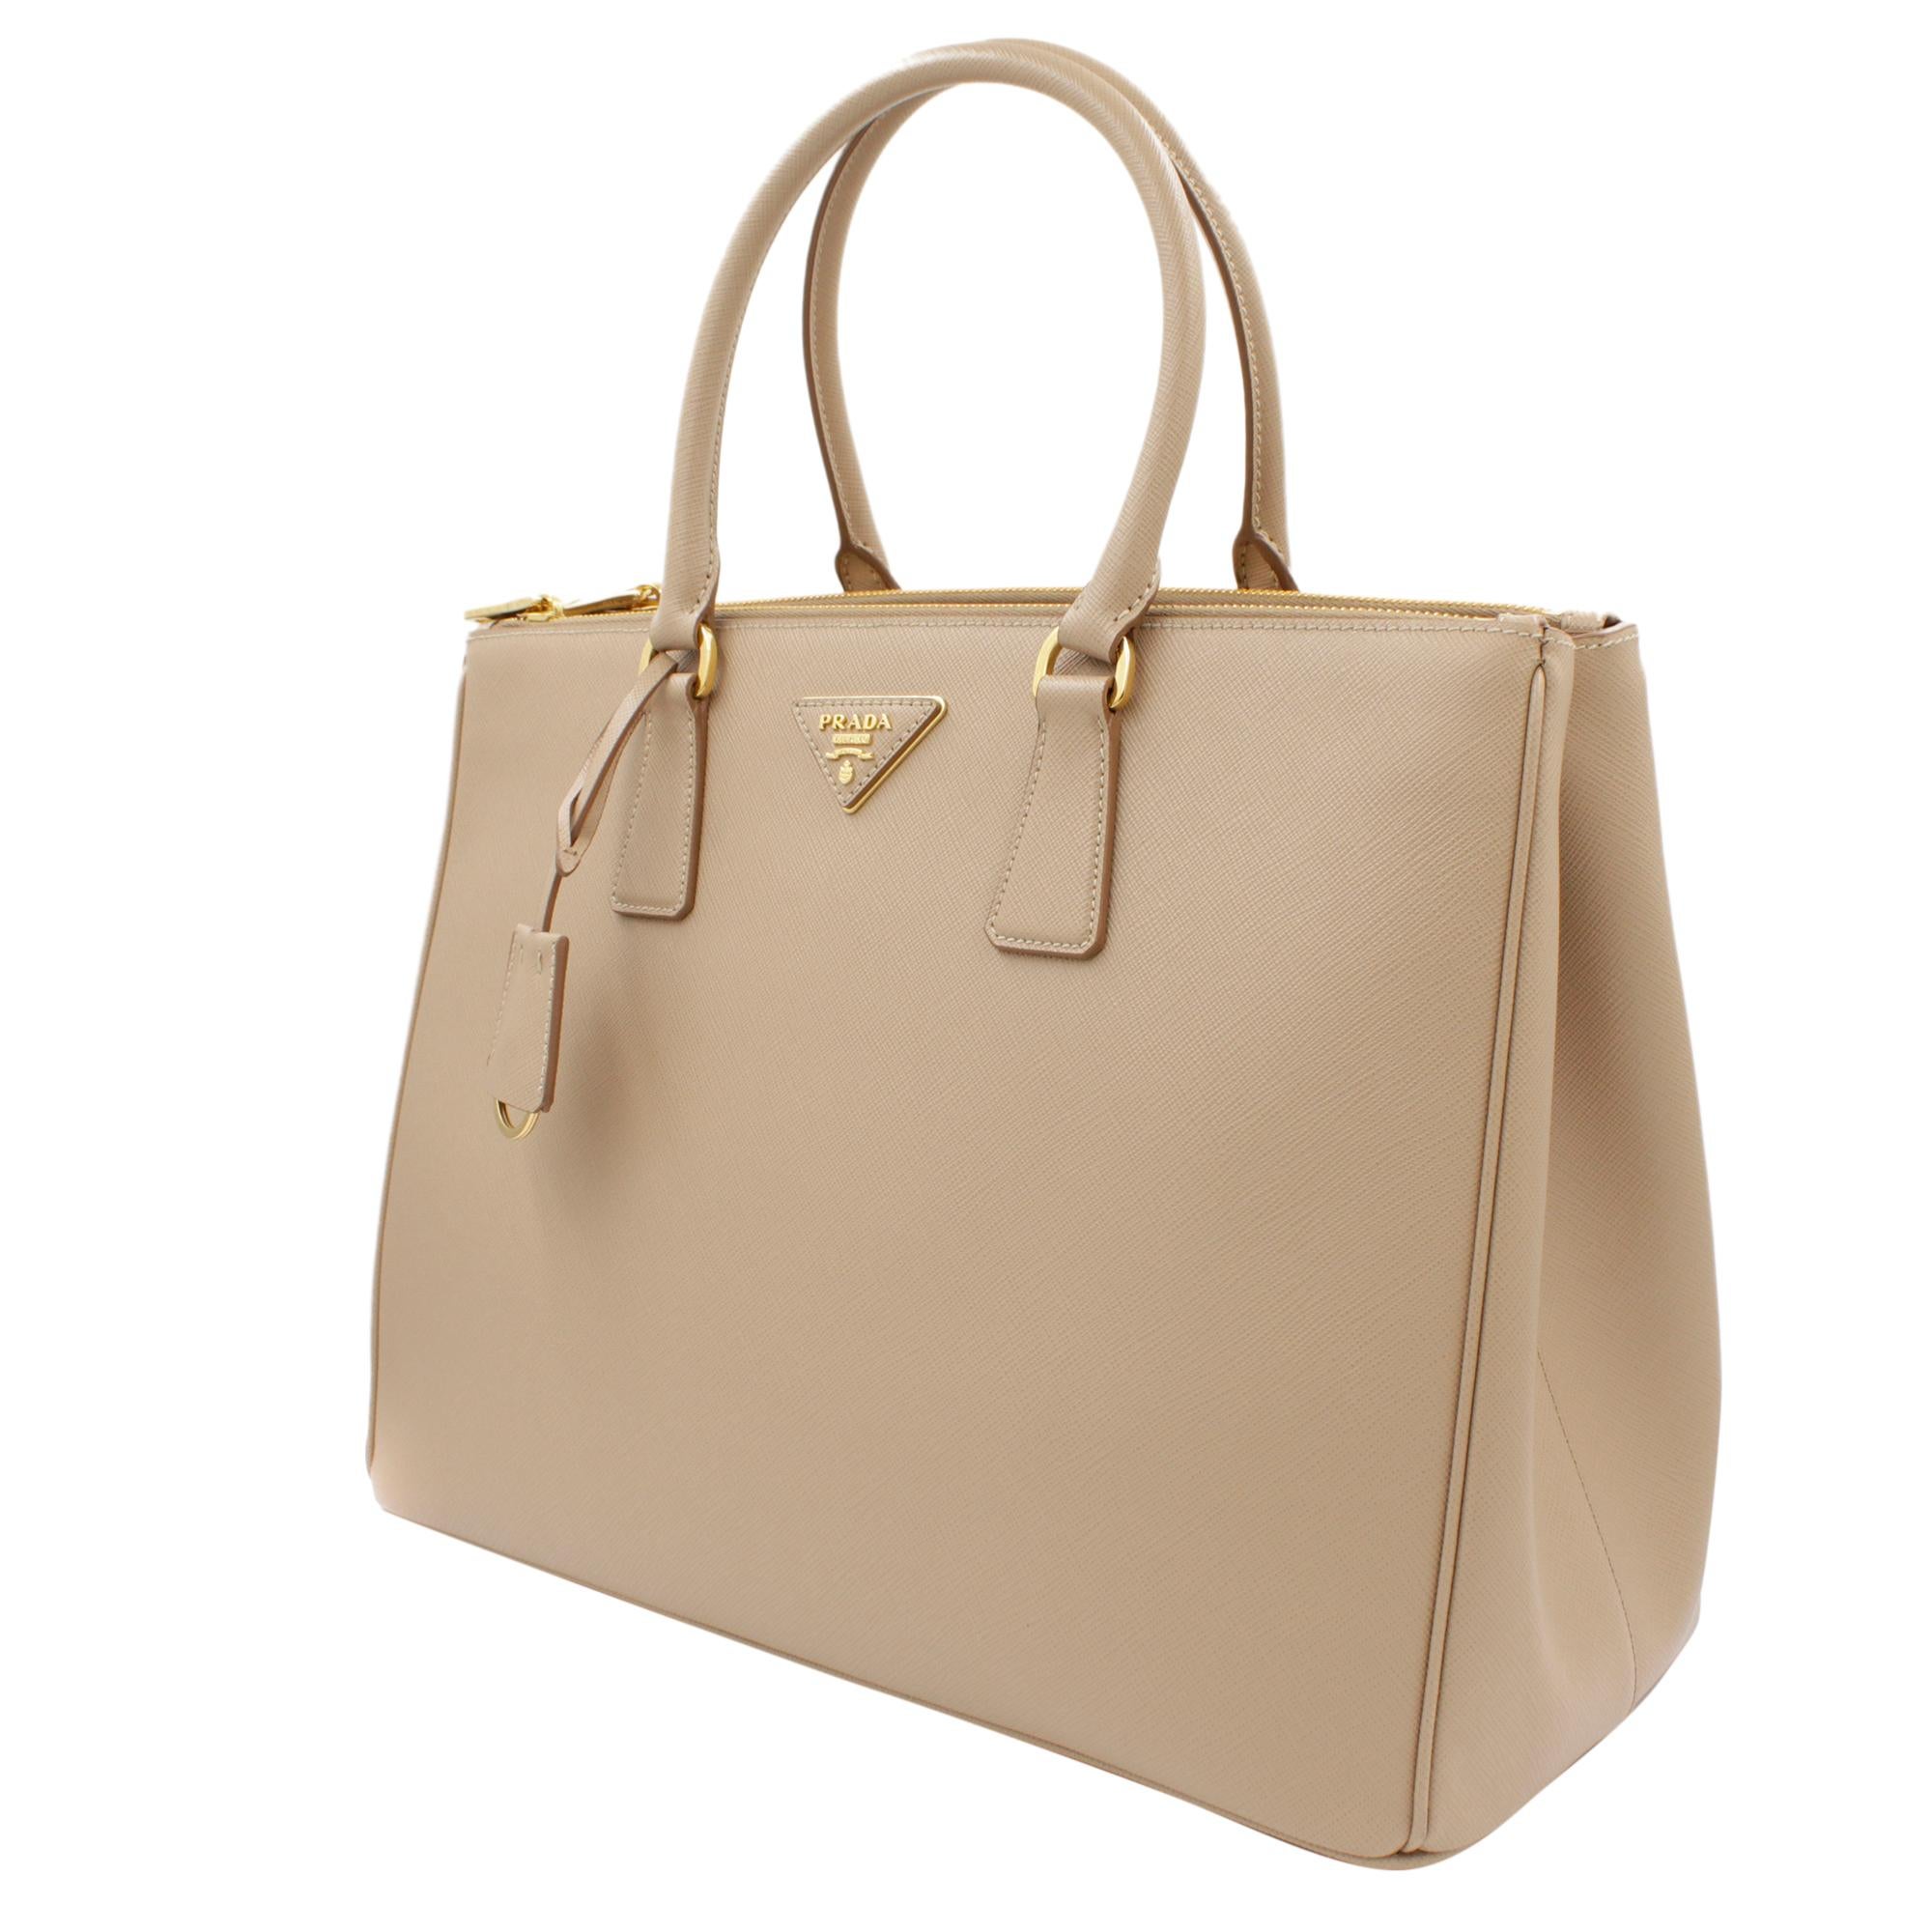 Prada's Galleria saffiano tote is a perfectly prim addition to your accessories edit. Crafted from textured beige calf leather, this design is finished with dainty top handles and golden hardware. Double storage compartments leave ample room for